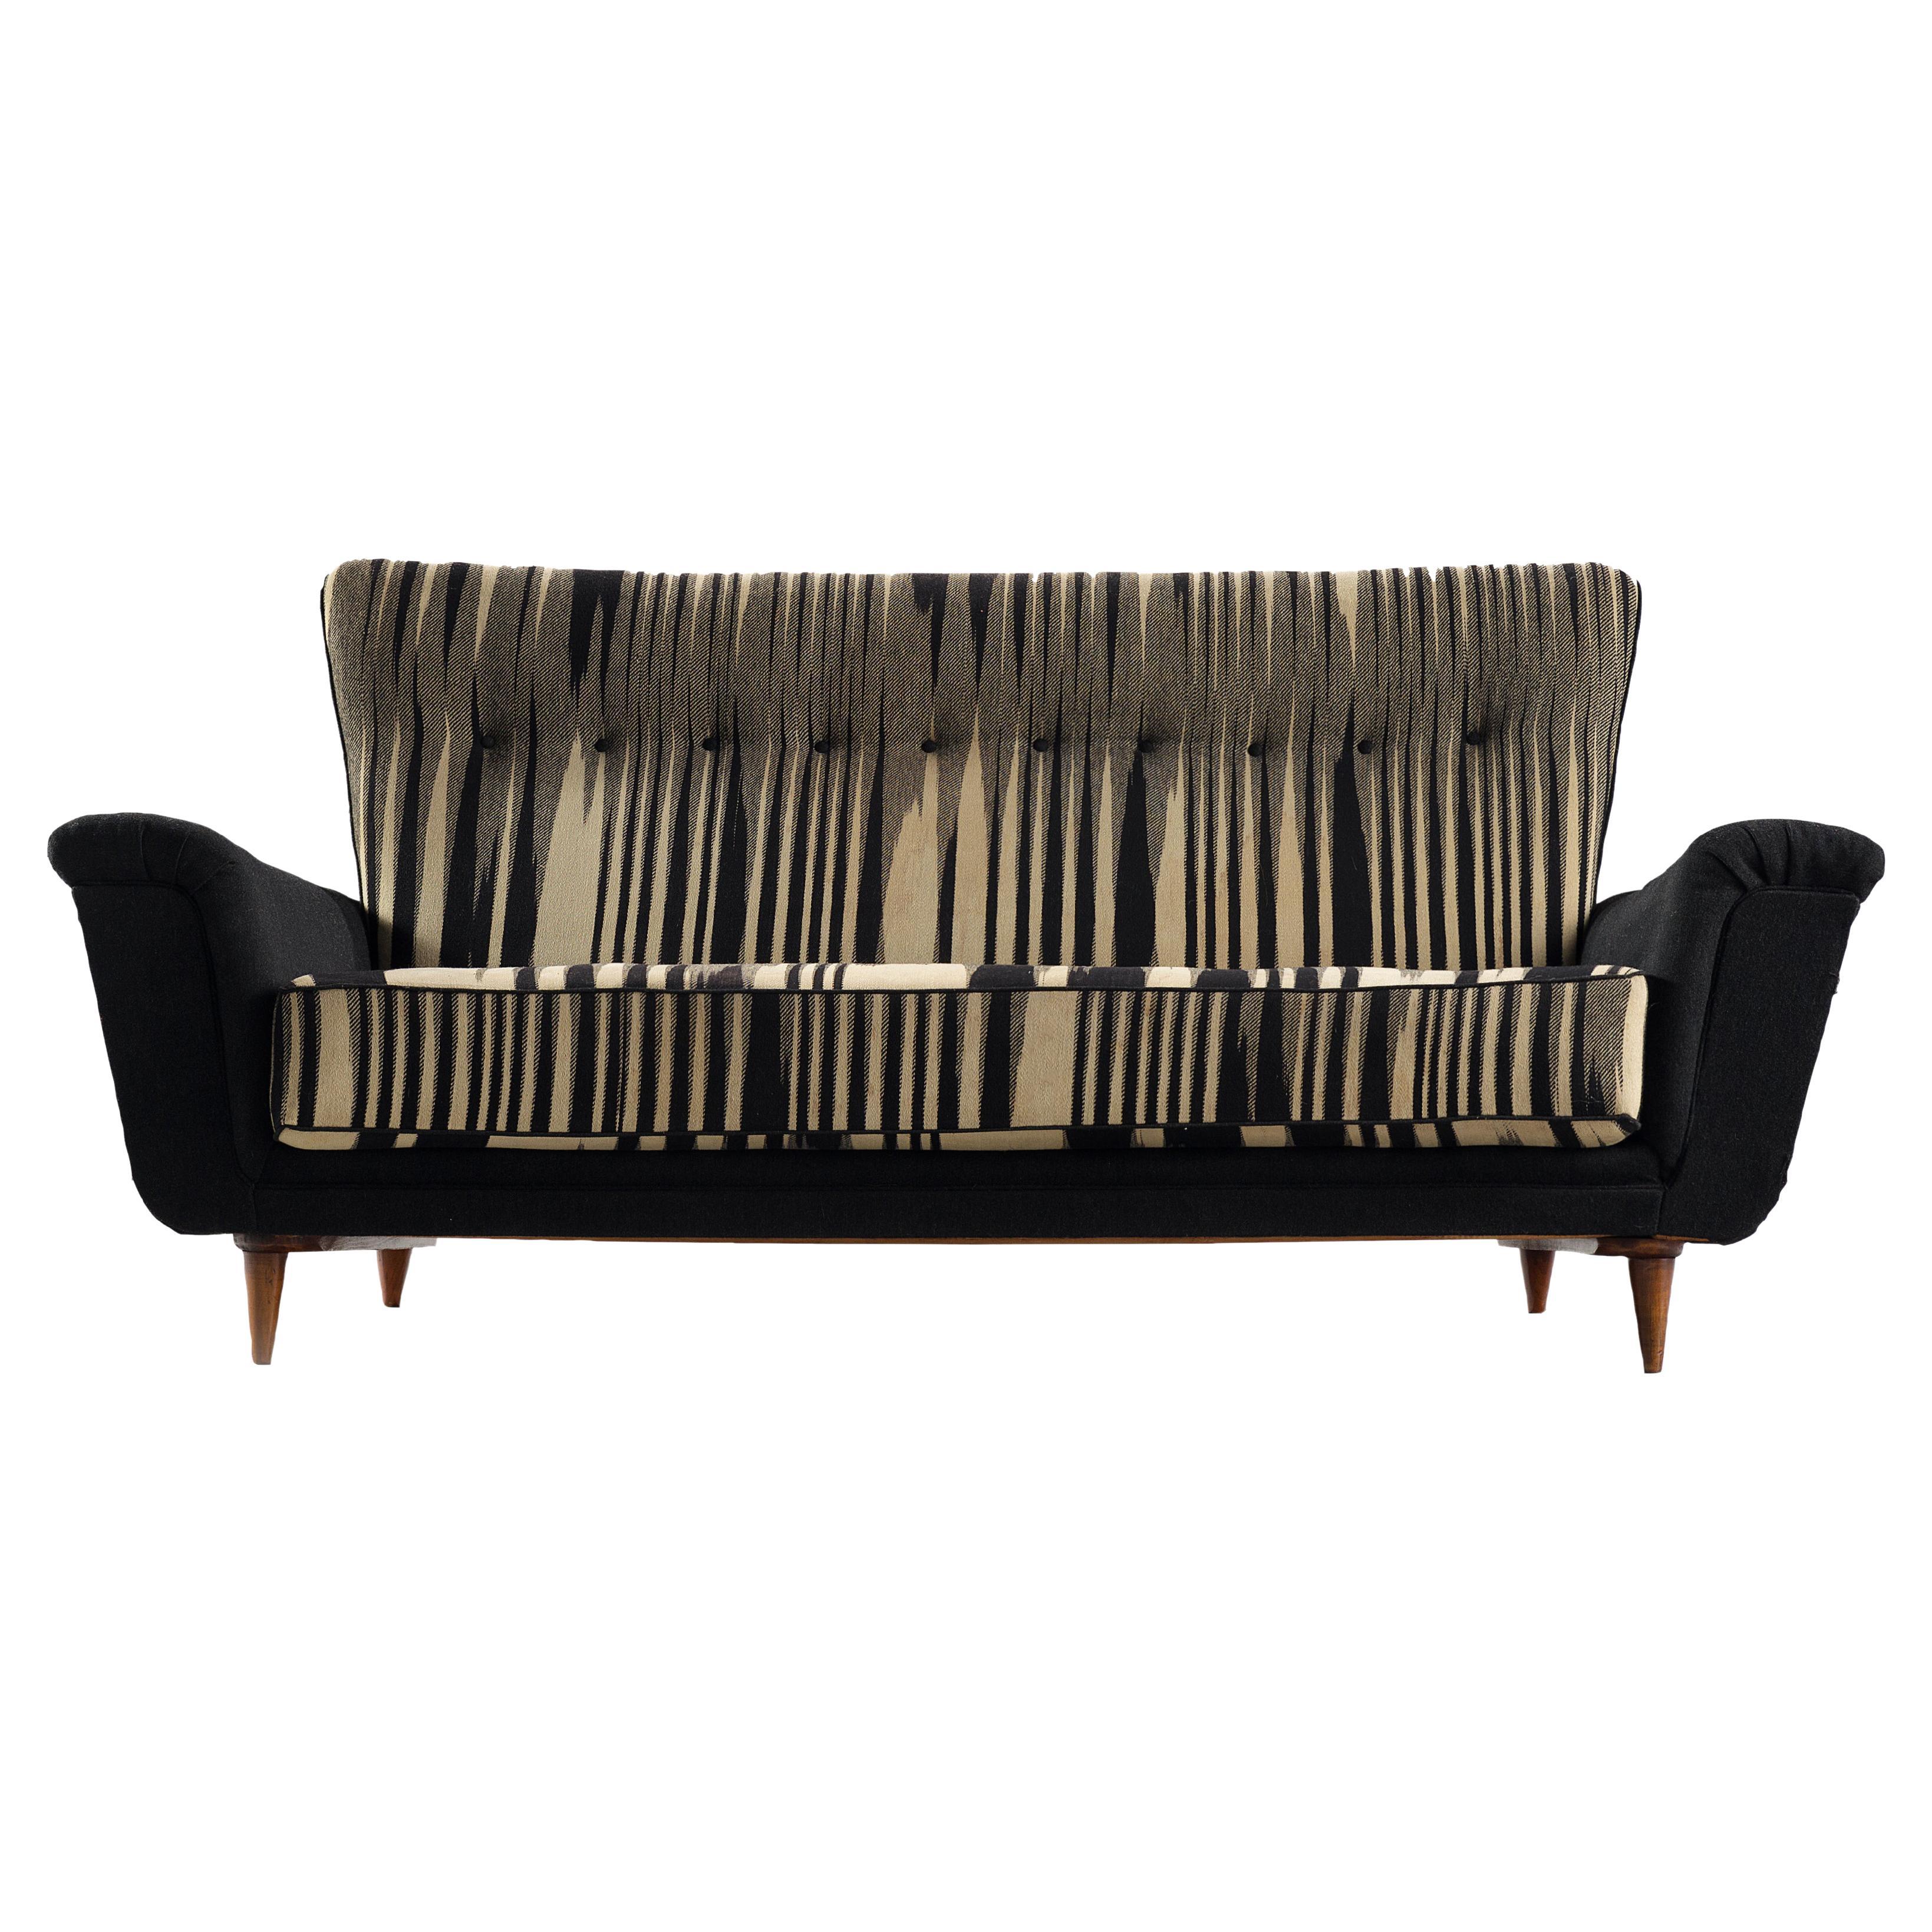 Theo Ruth for Artifort Sofa in Original Striped Upholstery For Sale